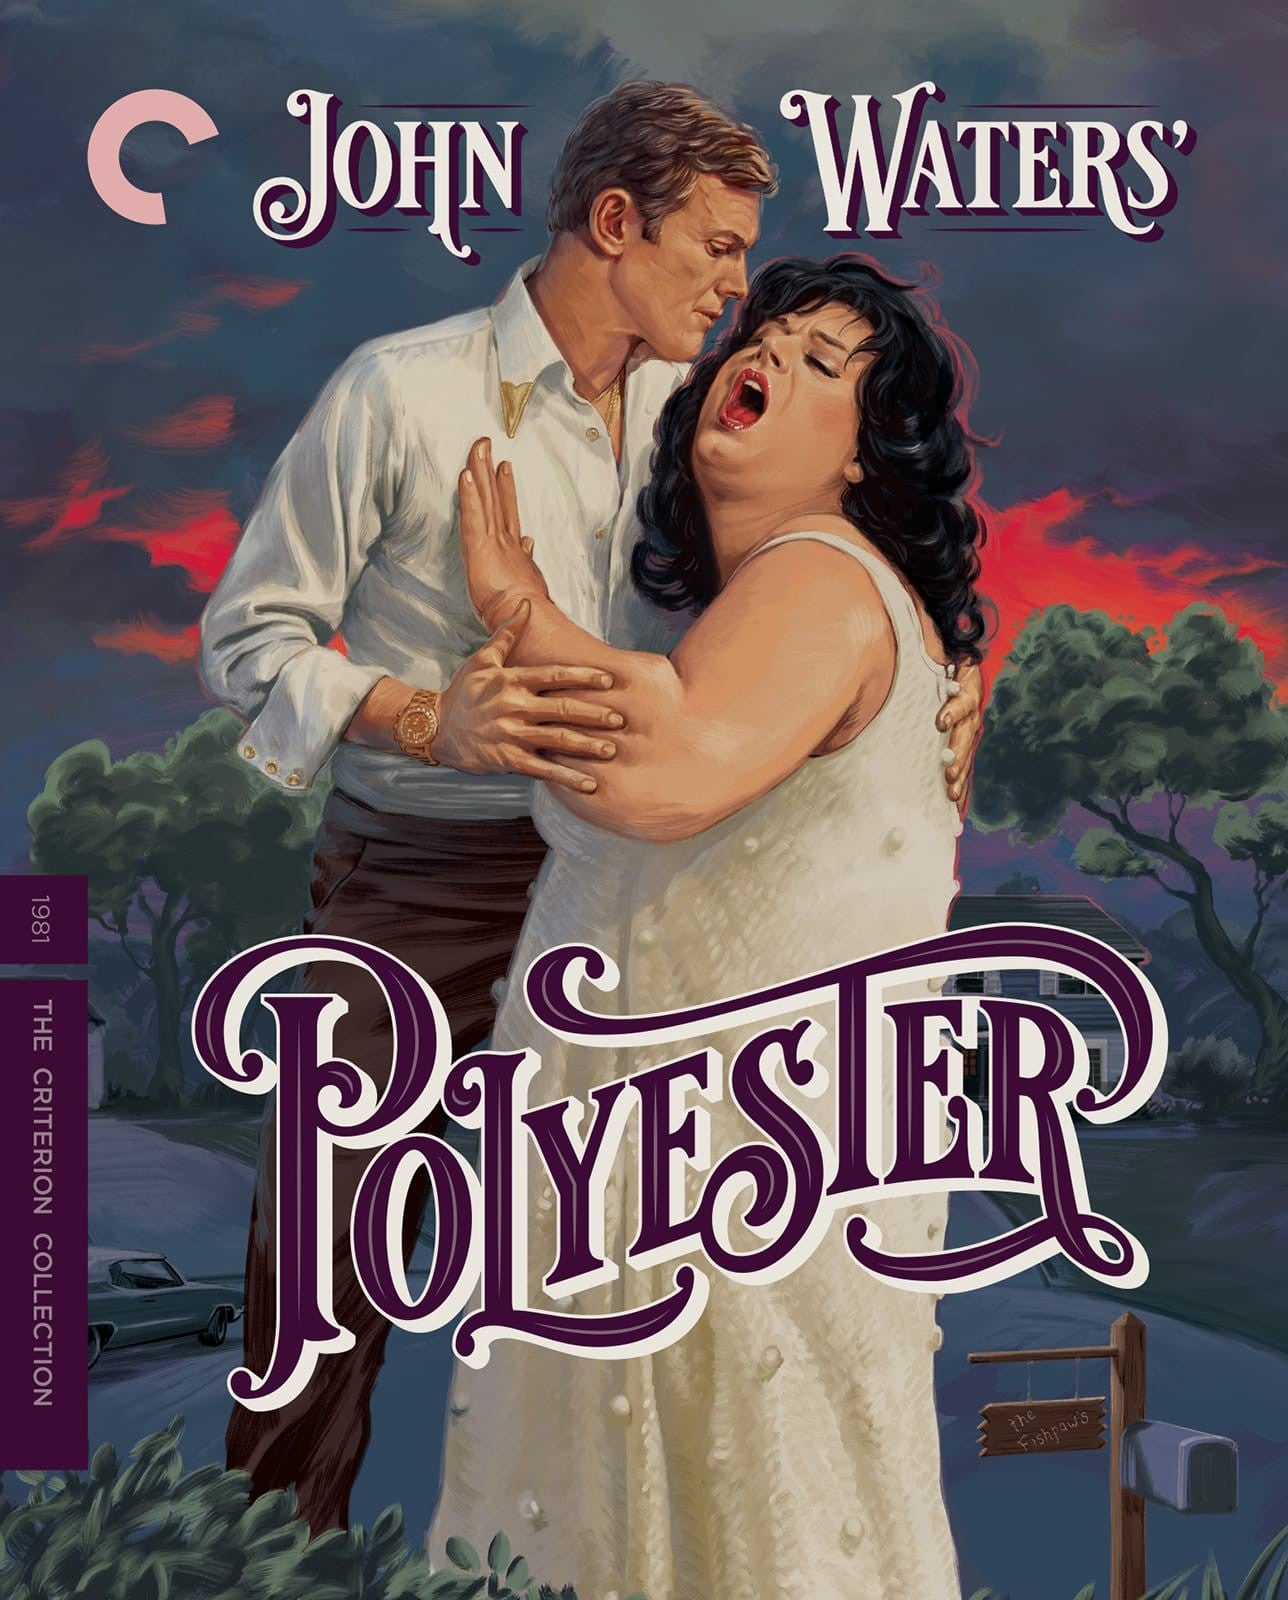 Polyester  [Criterion] - Darkside Records